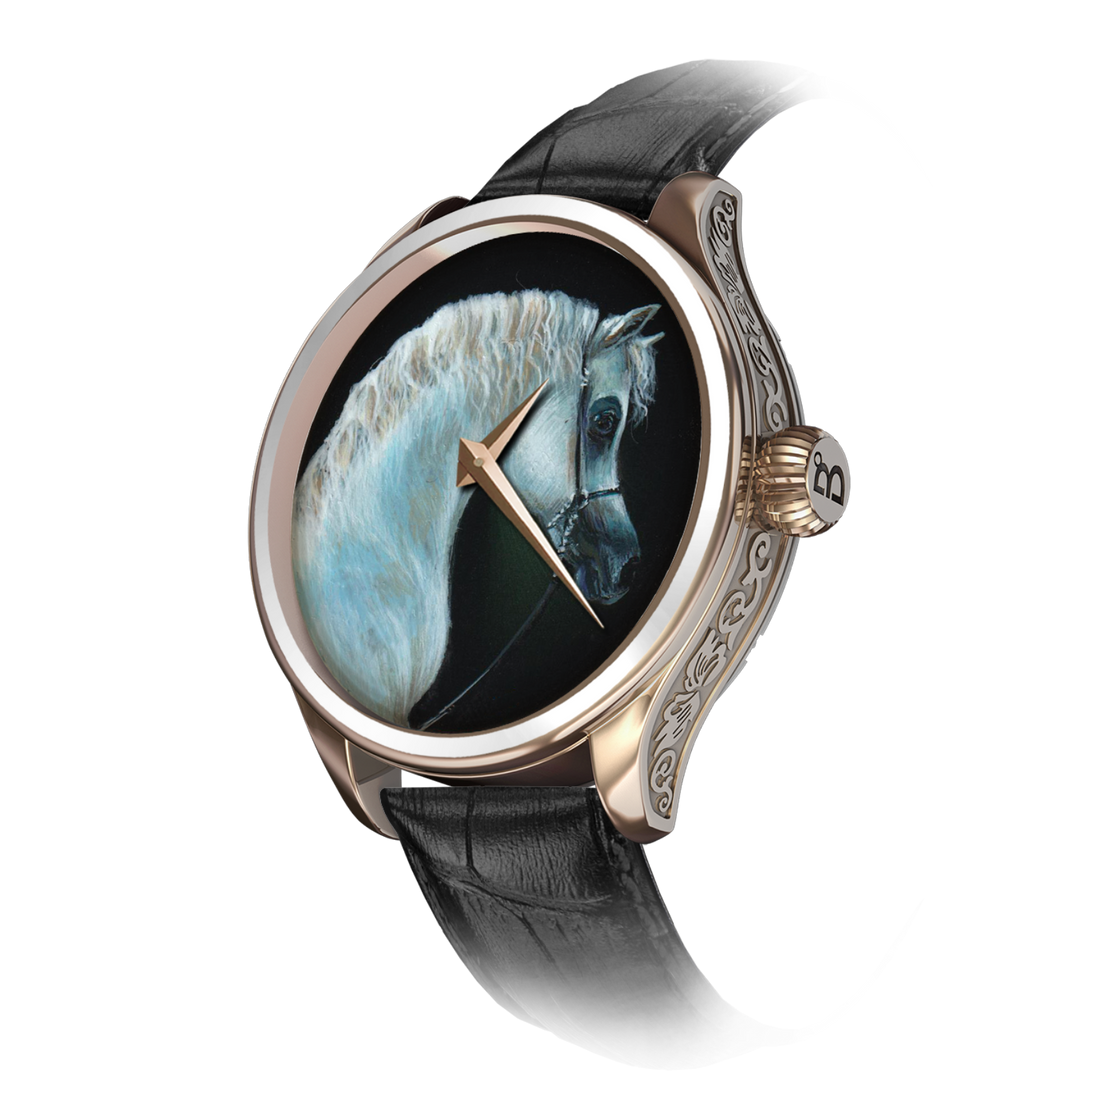 B360-watch-Moezz Al Baydaa Watch - A hand-painted portrait of the majestic Straight Egyptian Arabian horse, Moezz Al Baydaa, on the watch dial. Capturing its grace, elegance, and nobility in intricate detail, this horological masterpiece is a tribute to the timeless beauty of Moezz Al Baydaa and the artistry of equine portraiture